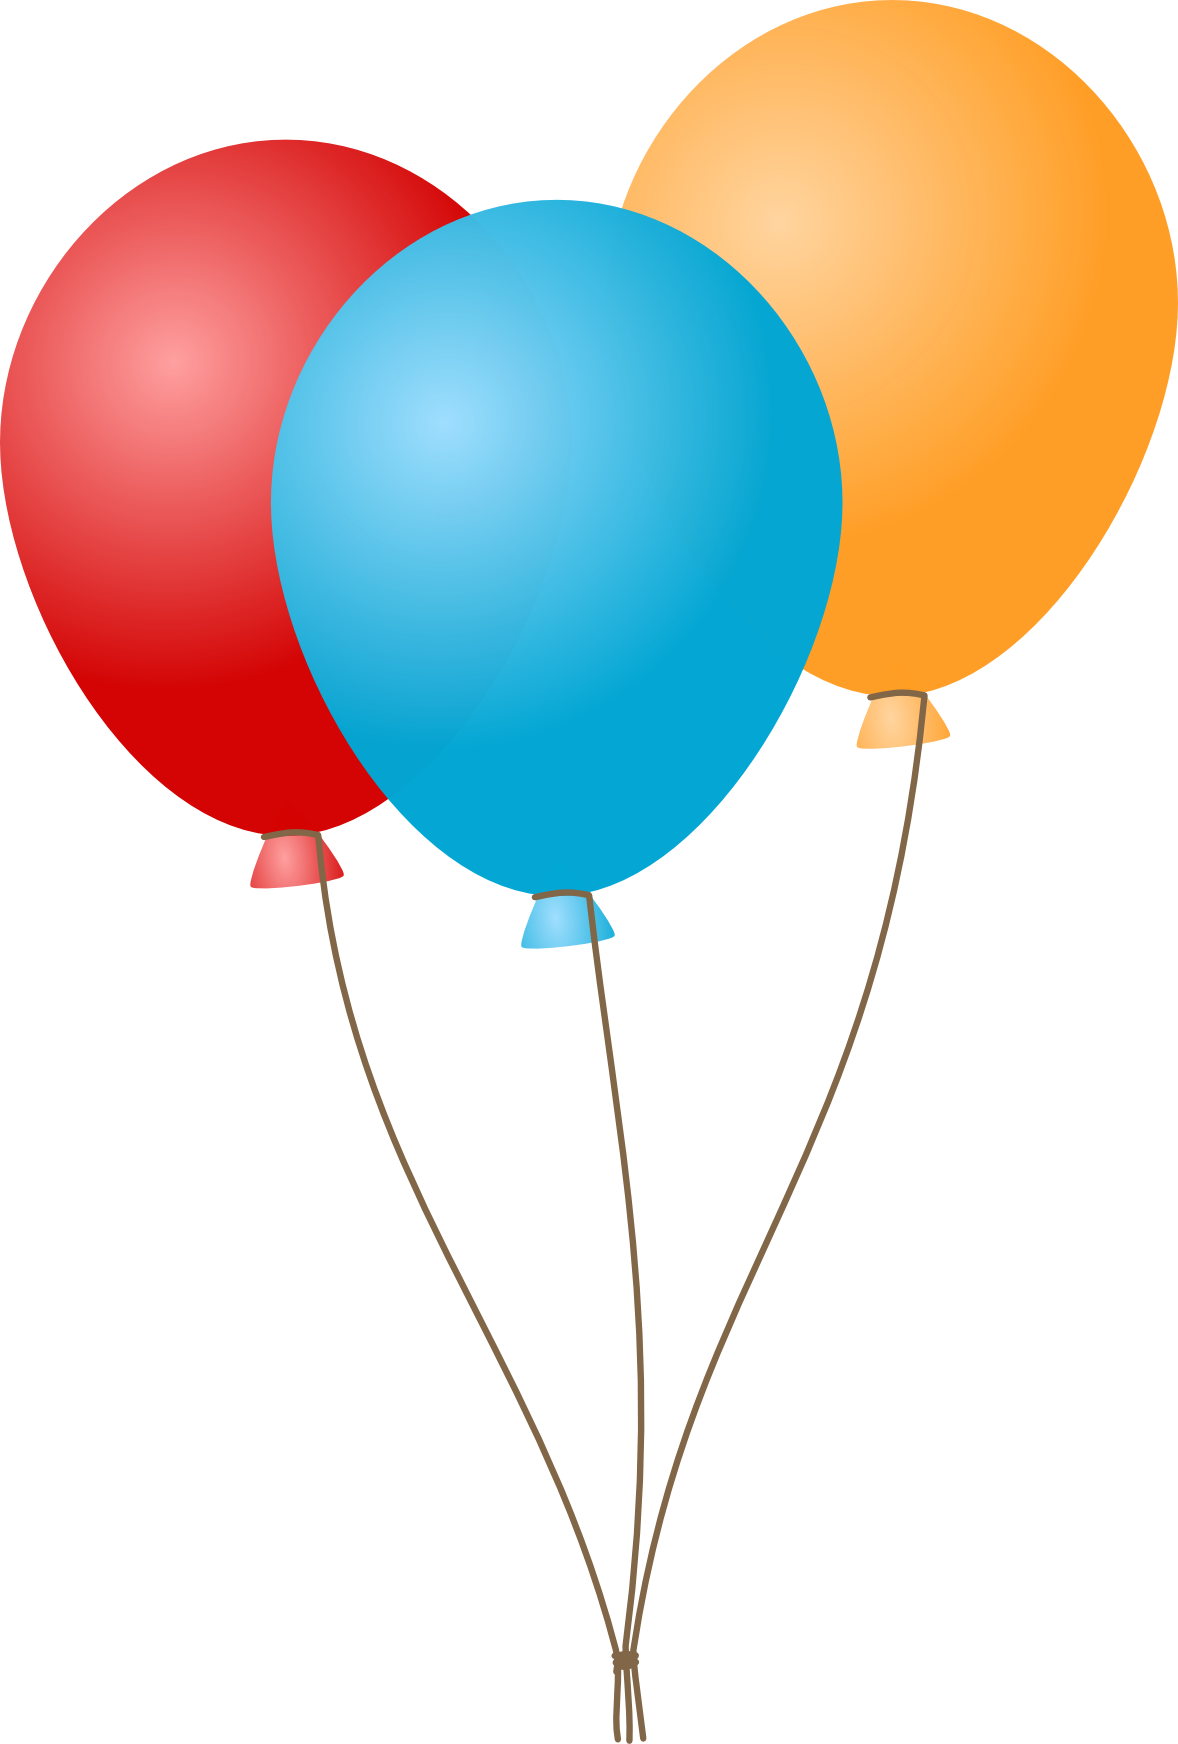 Png images free picture. Gas clipart big balloon